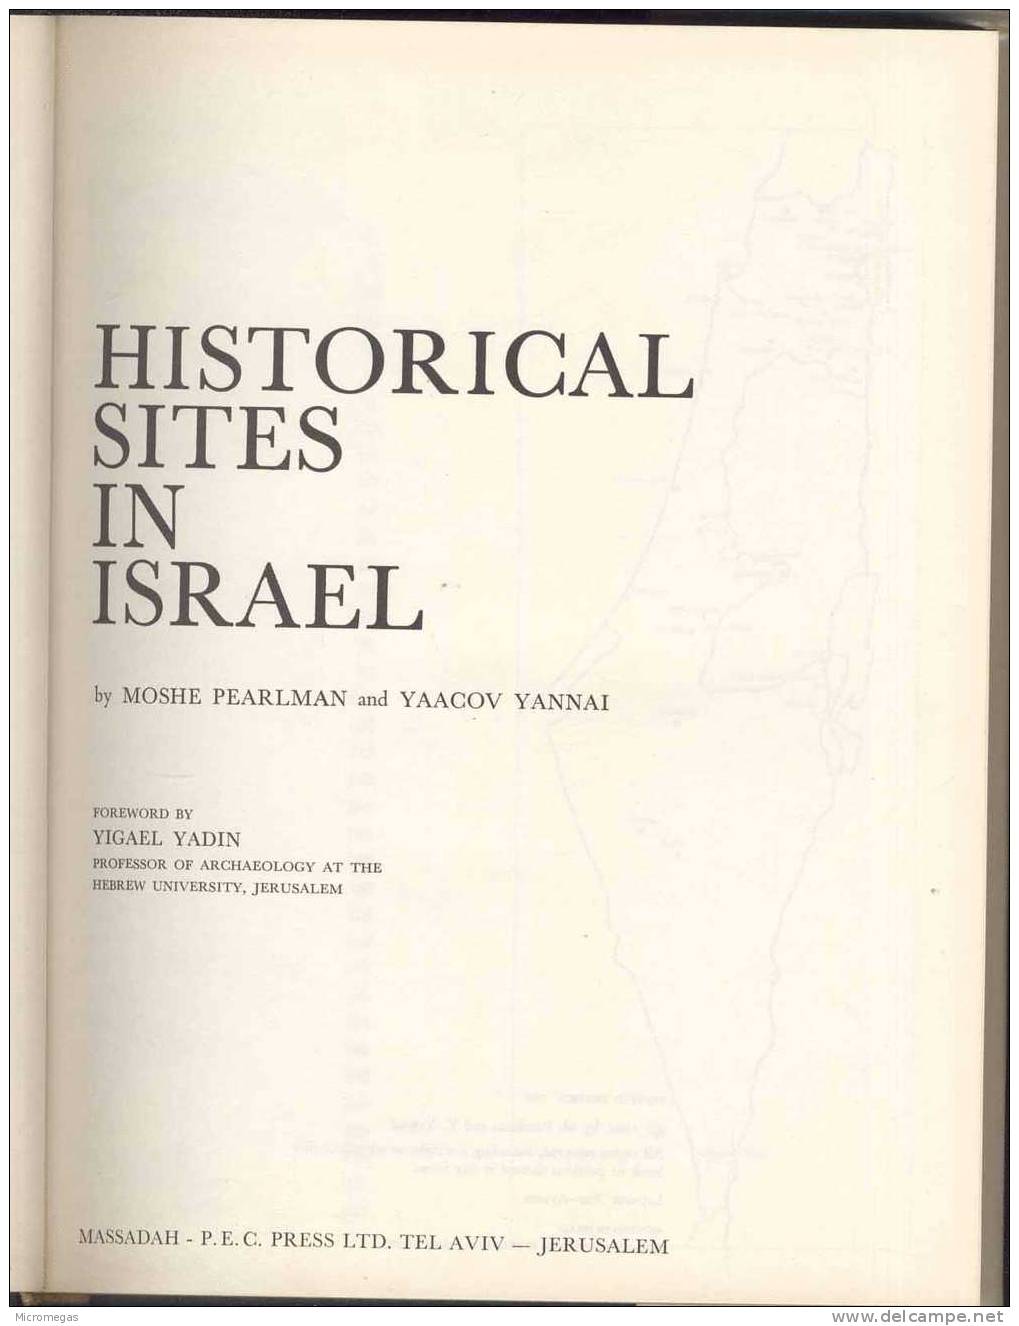 Historical Sites In Israel - Moshe Pearlman And Yaccov Yannai - Middle East